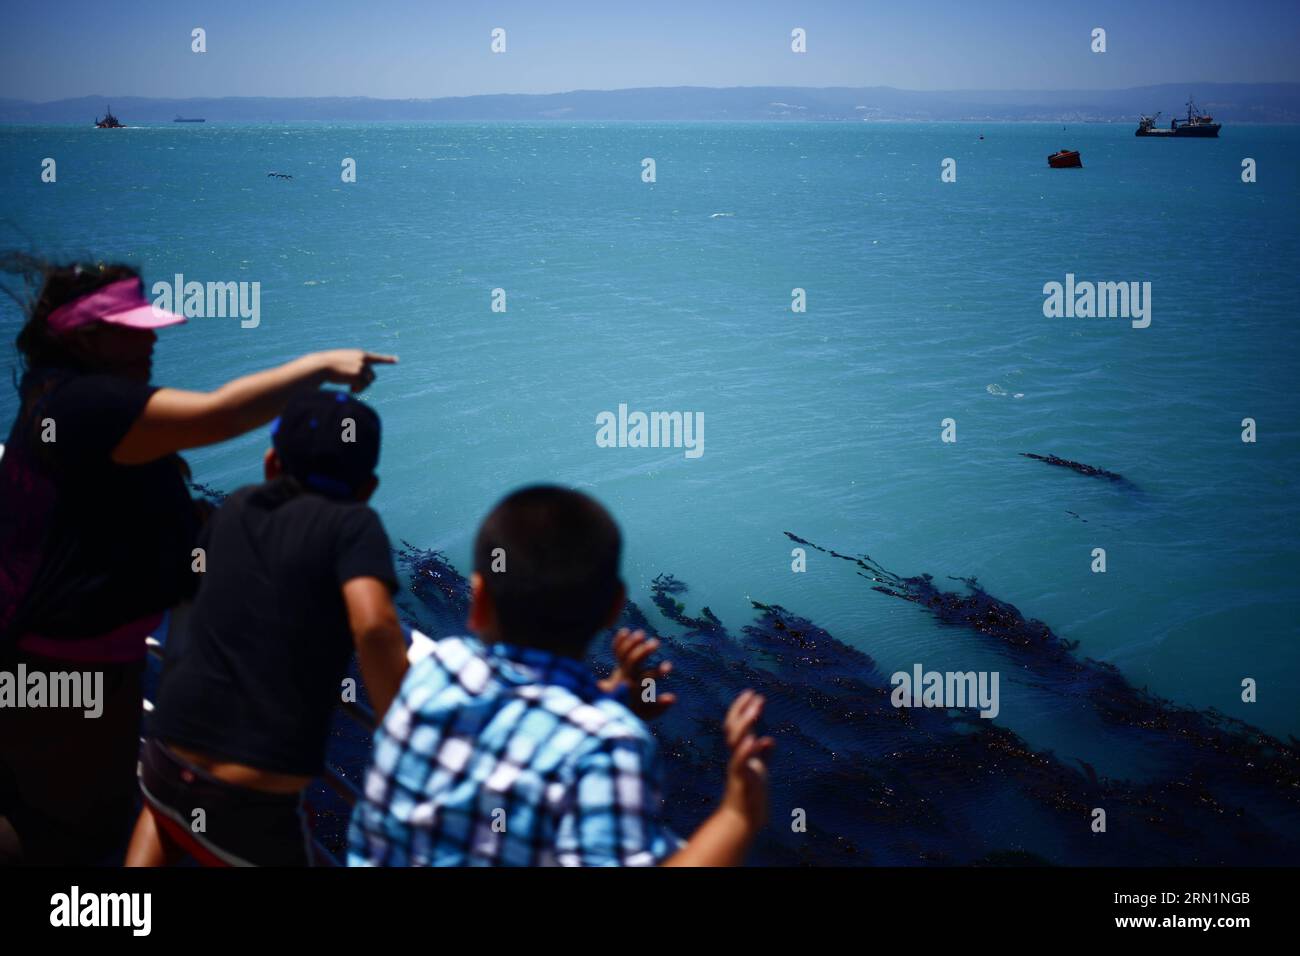 TALCAHUANO, Jan. 12, 2015 -- People watch the water of the Bay of Concepcion, in Talcahuano, in the Biobio region, Chile, on Jan. 12, 2015. According to local press, the waters of the Bay of Concepcion have become turquoise due to low oxygenation of the liquid called coastal upwelling . Str) (lyi) CHILE-TALCAHUANO-BAY-ENVIRONMENT e JORGExVILLEGAS PUBLICATIONxNOTxINxCHN   Jan 12 2015 Celebrities Watch The Water of The Bay of Concepcion in  in The BioBio Region Chile ON Jan 12 2015 According to Local Press The Waters of The Bay of Concepcion have Become Turquoise Due to Low  of The Liquid called Stock Photo